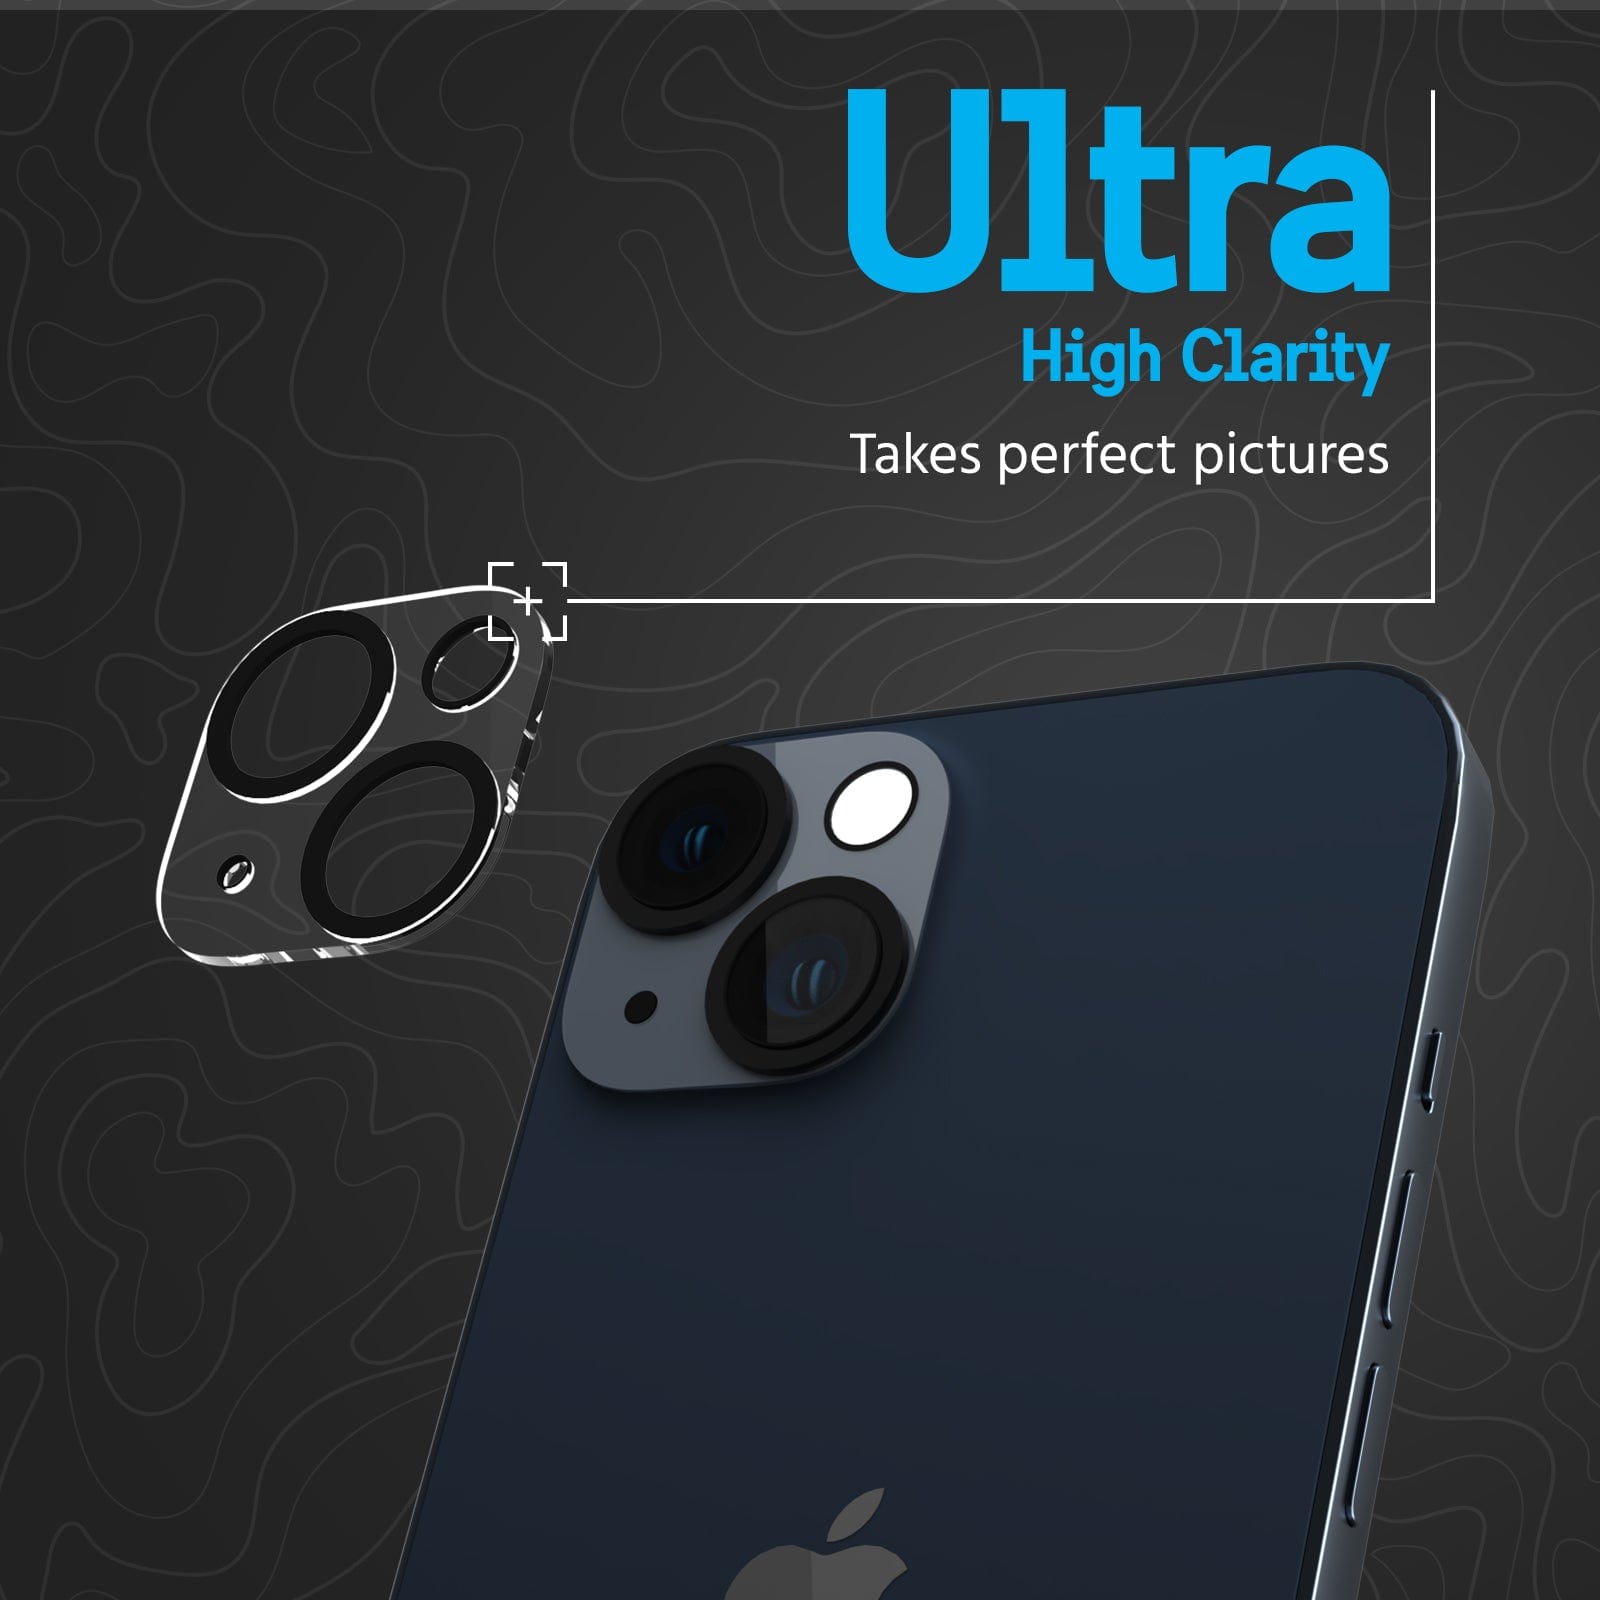 Ultra High Clarity. Takes perfect pictures.